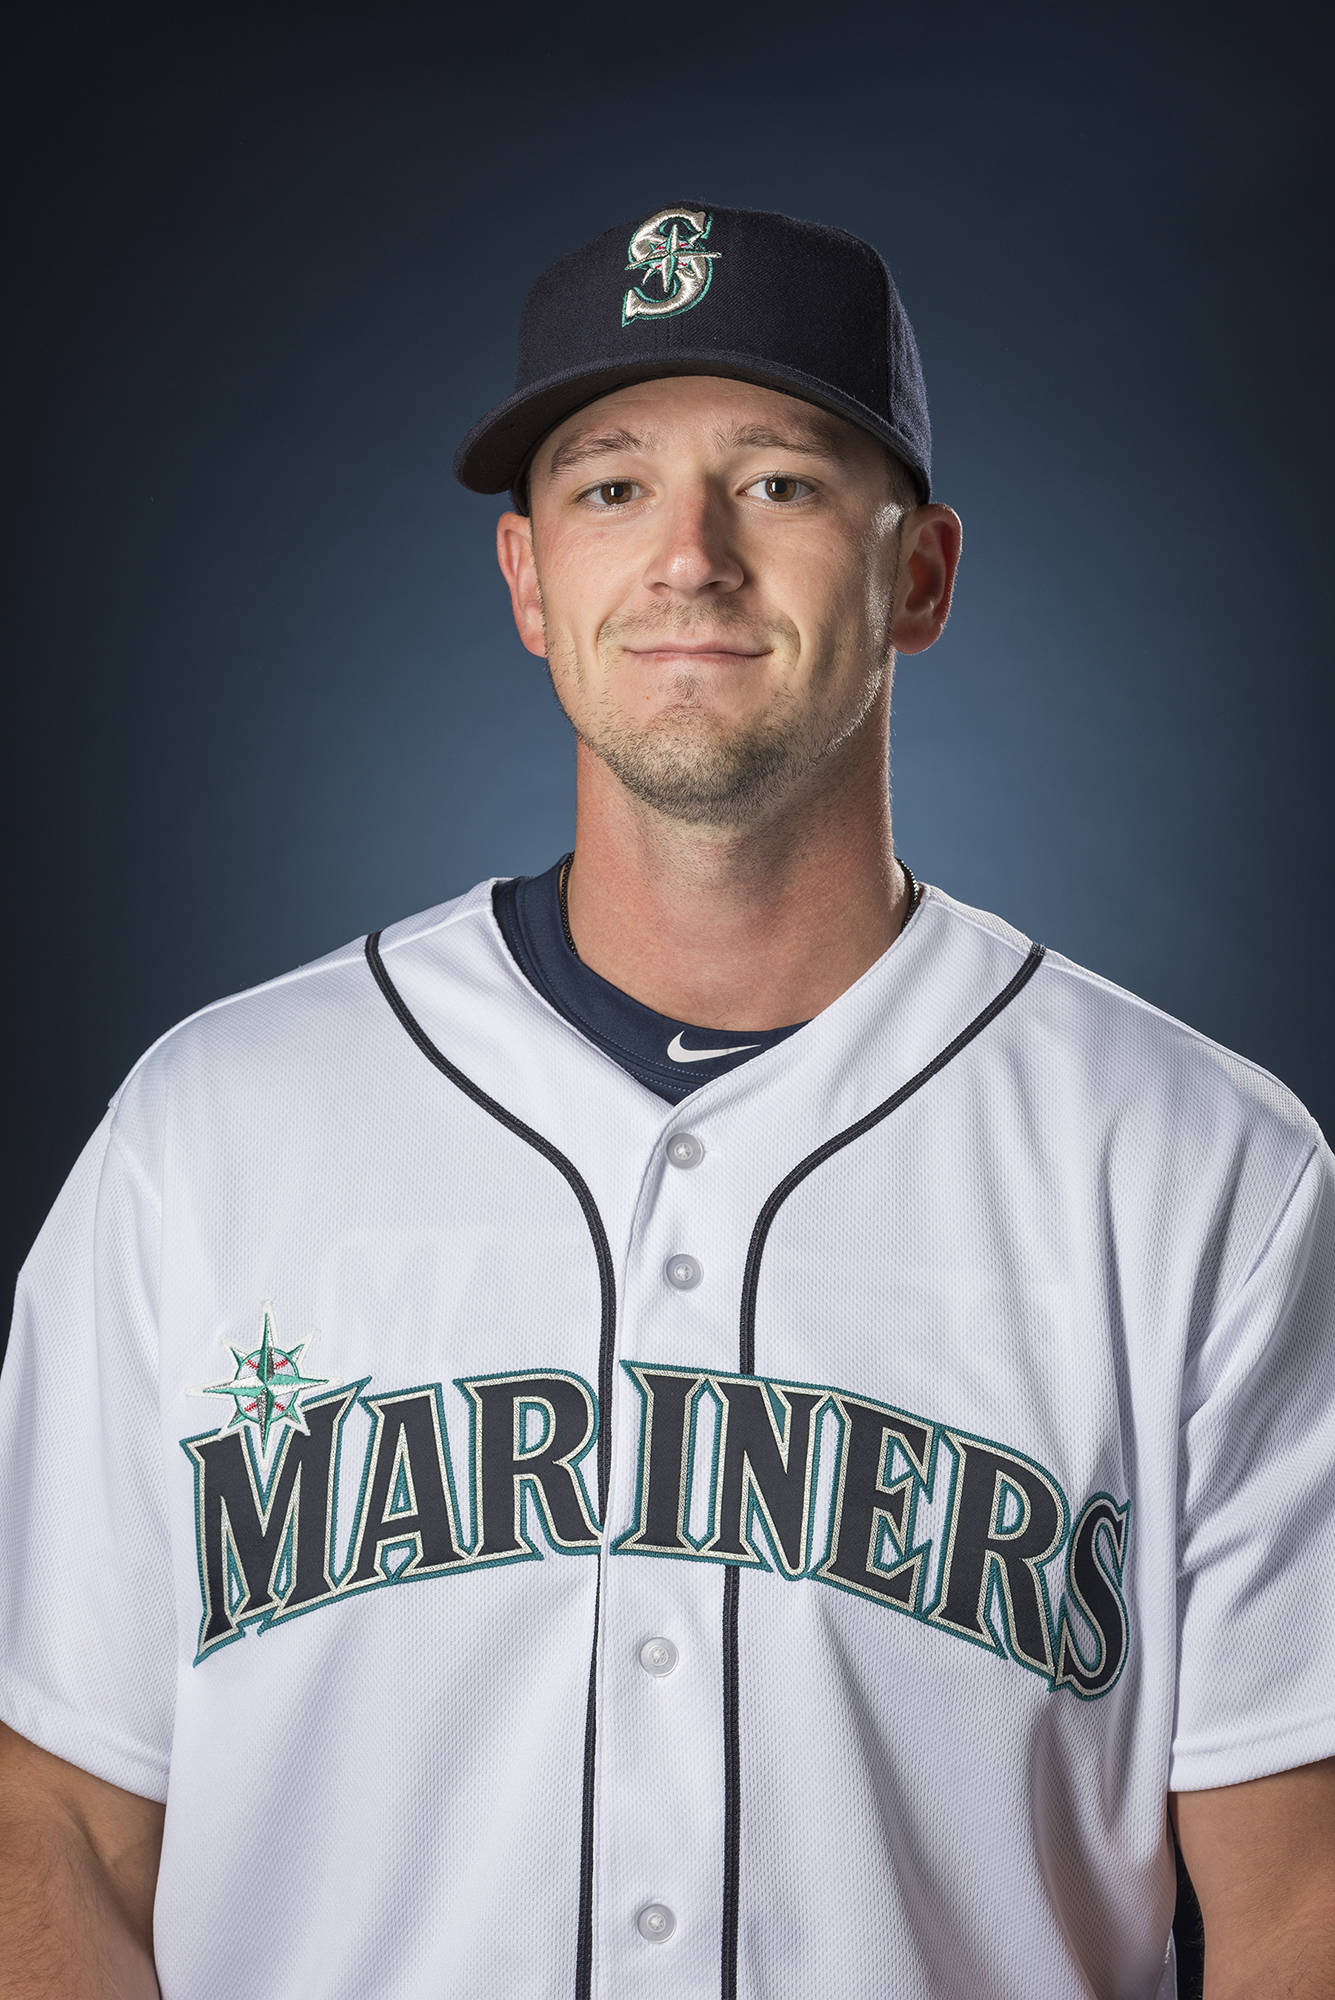 Mariners place Drew Smyly on the 60-day disabled list, reliever Evan Marshall claimed off waivers